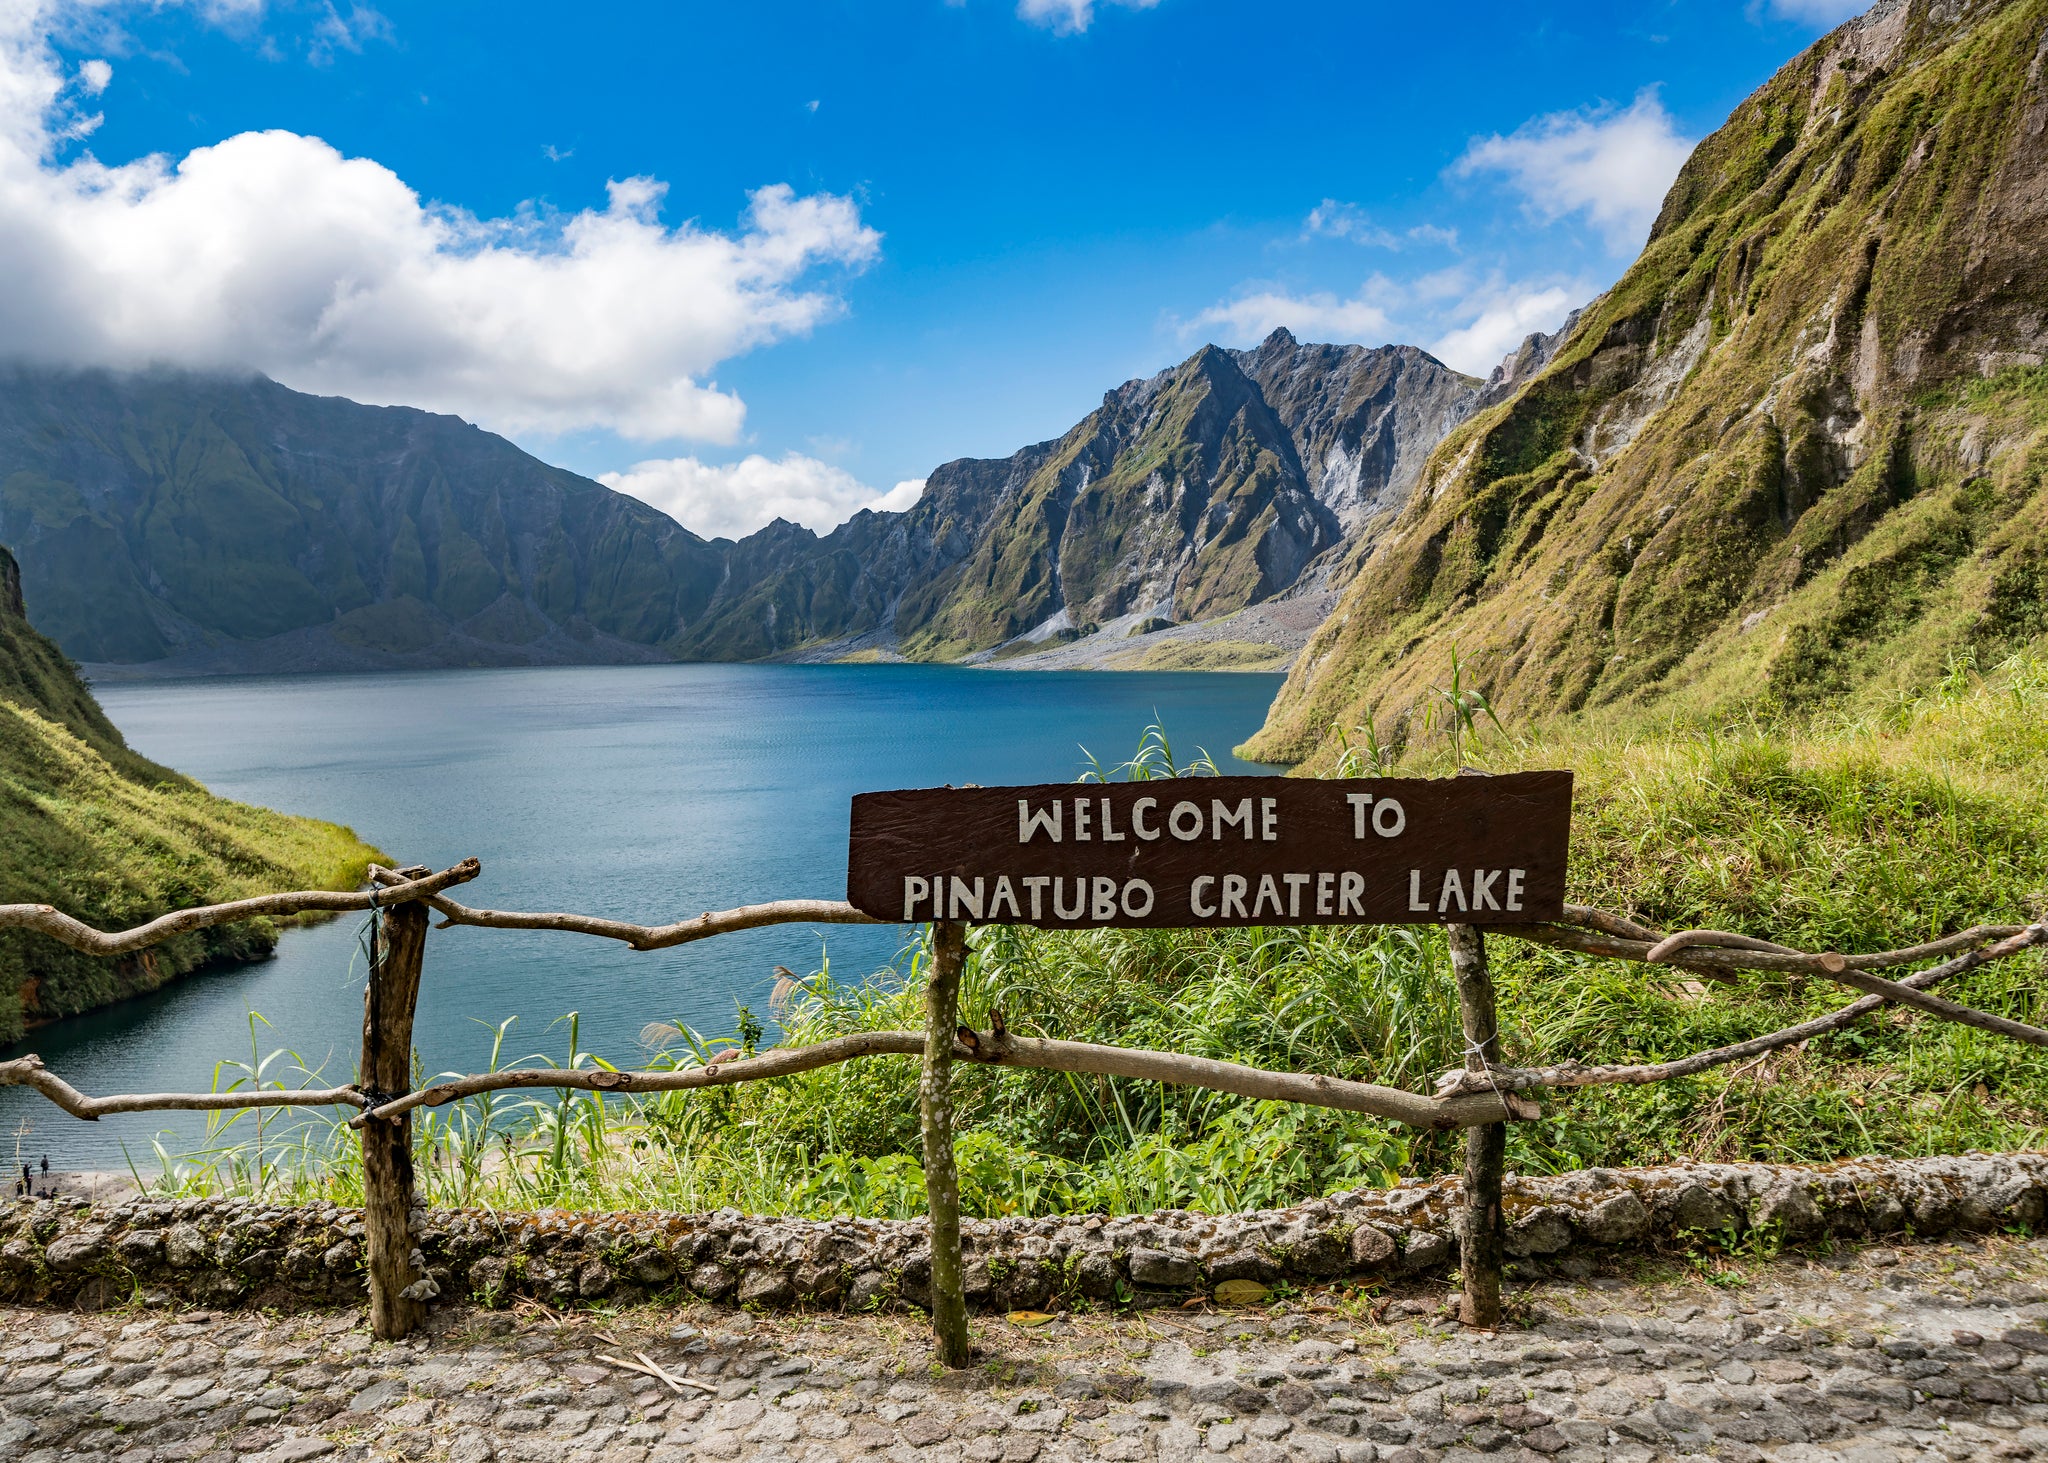 Pinatubo crater lake in Philippines